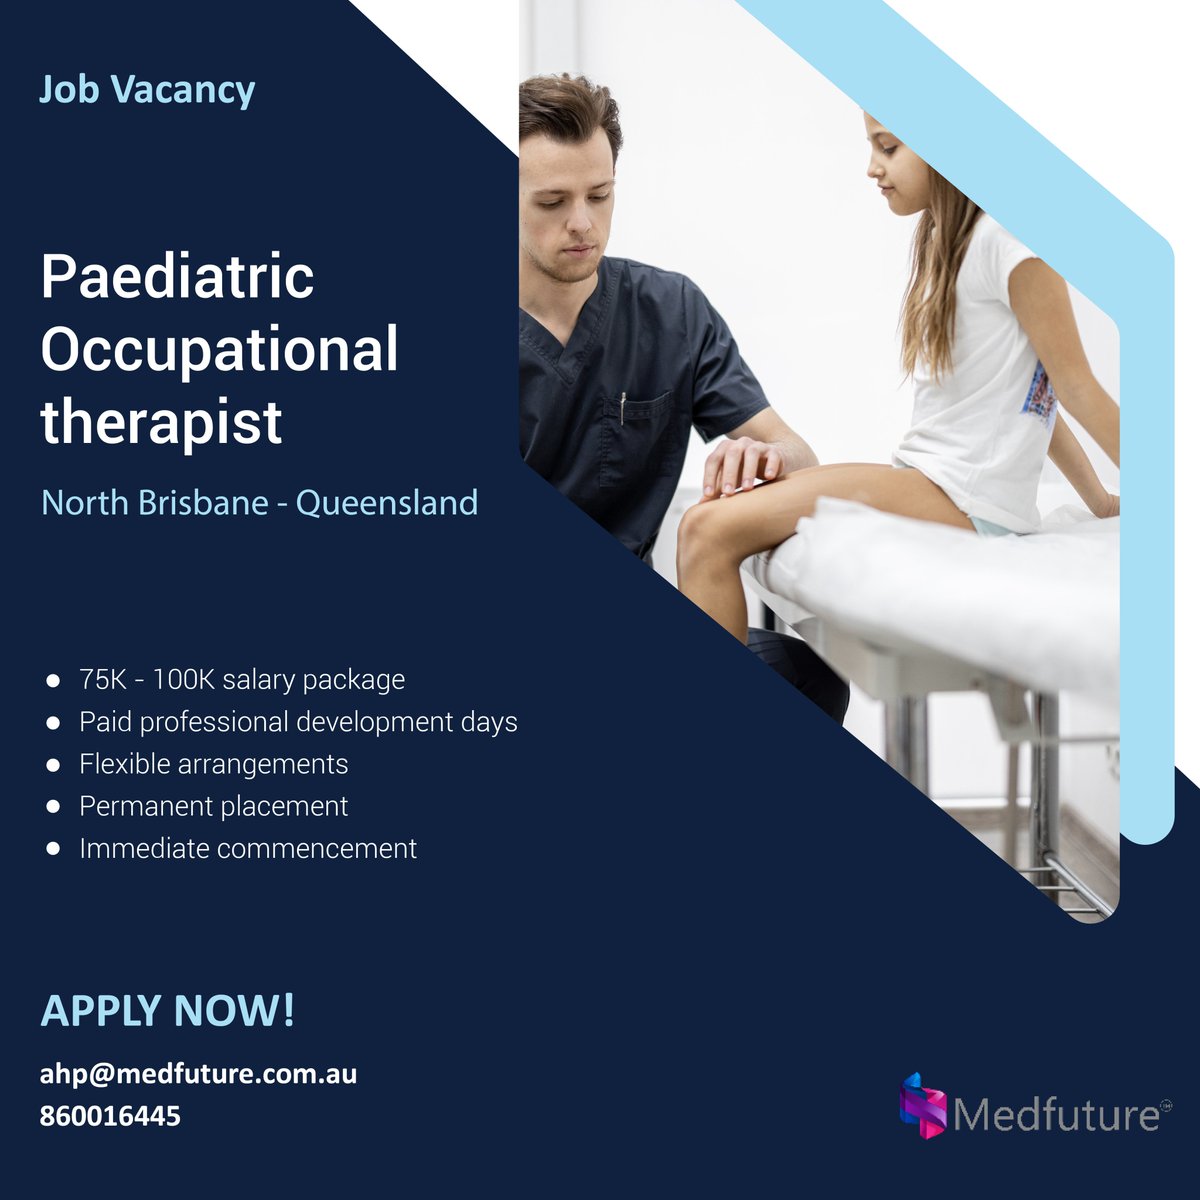 Paediatric Occupational Therapist vacancies are available in North Brisbane, QLD. Discover the latest healthcare professional job vacancies in Australia and New Zealand when you subscribe with Medfuture.
#Northbrisbane  #Australia #AUJobs #Queensland  #OccupationalTherapist